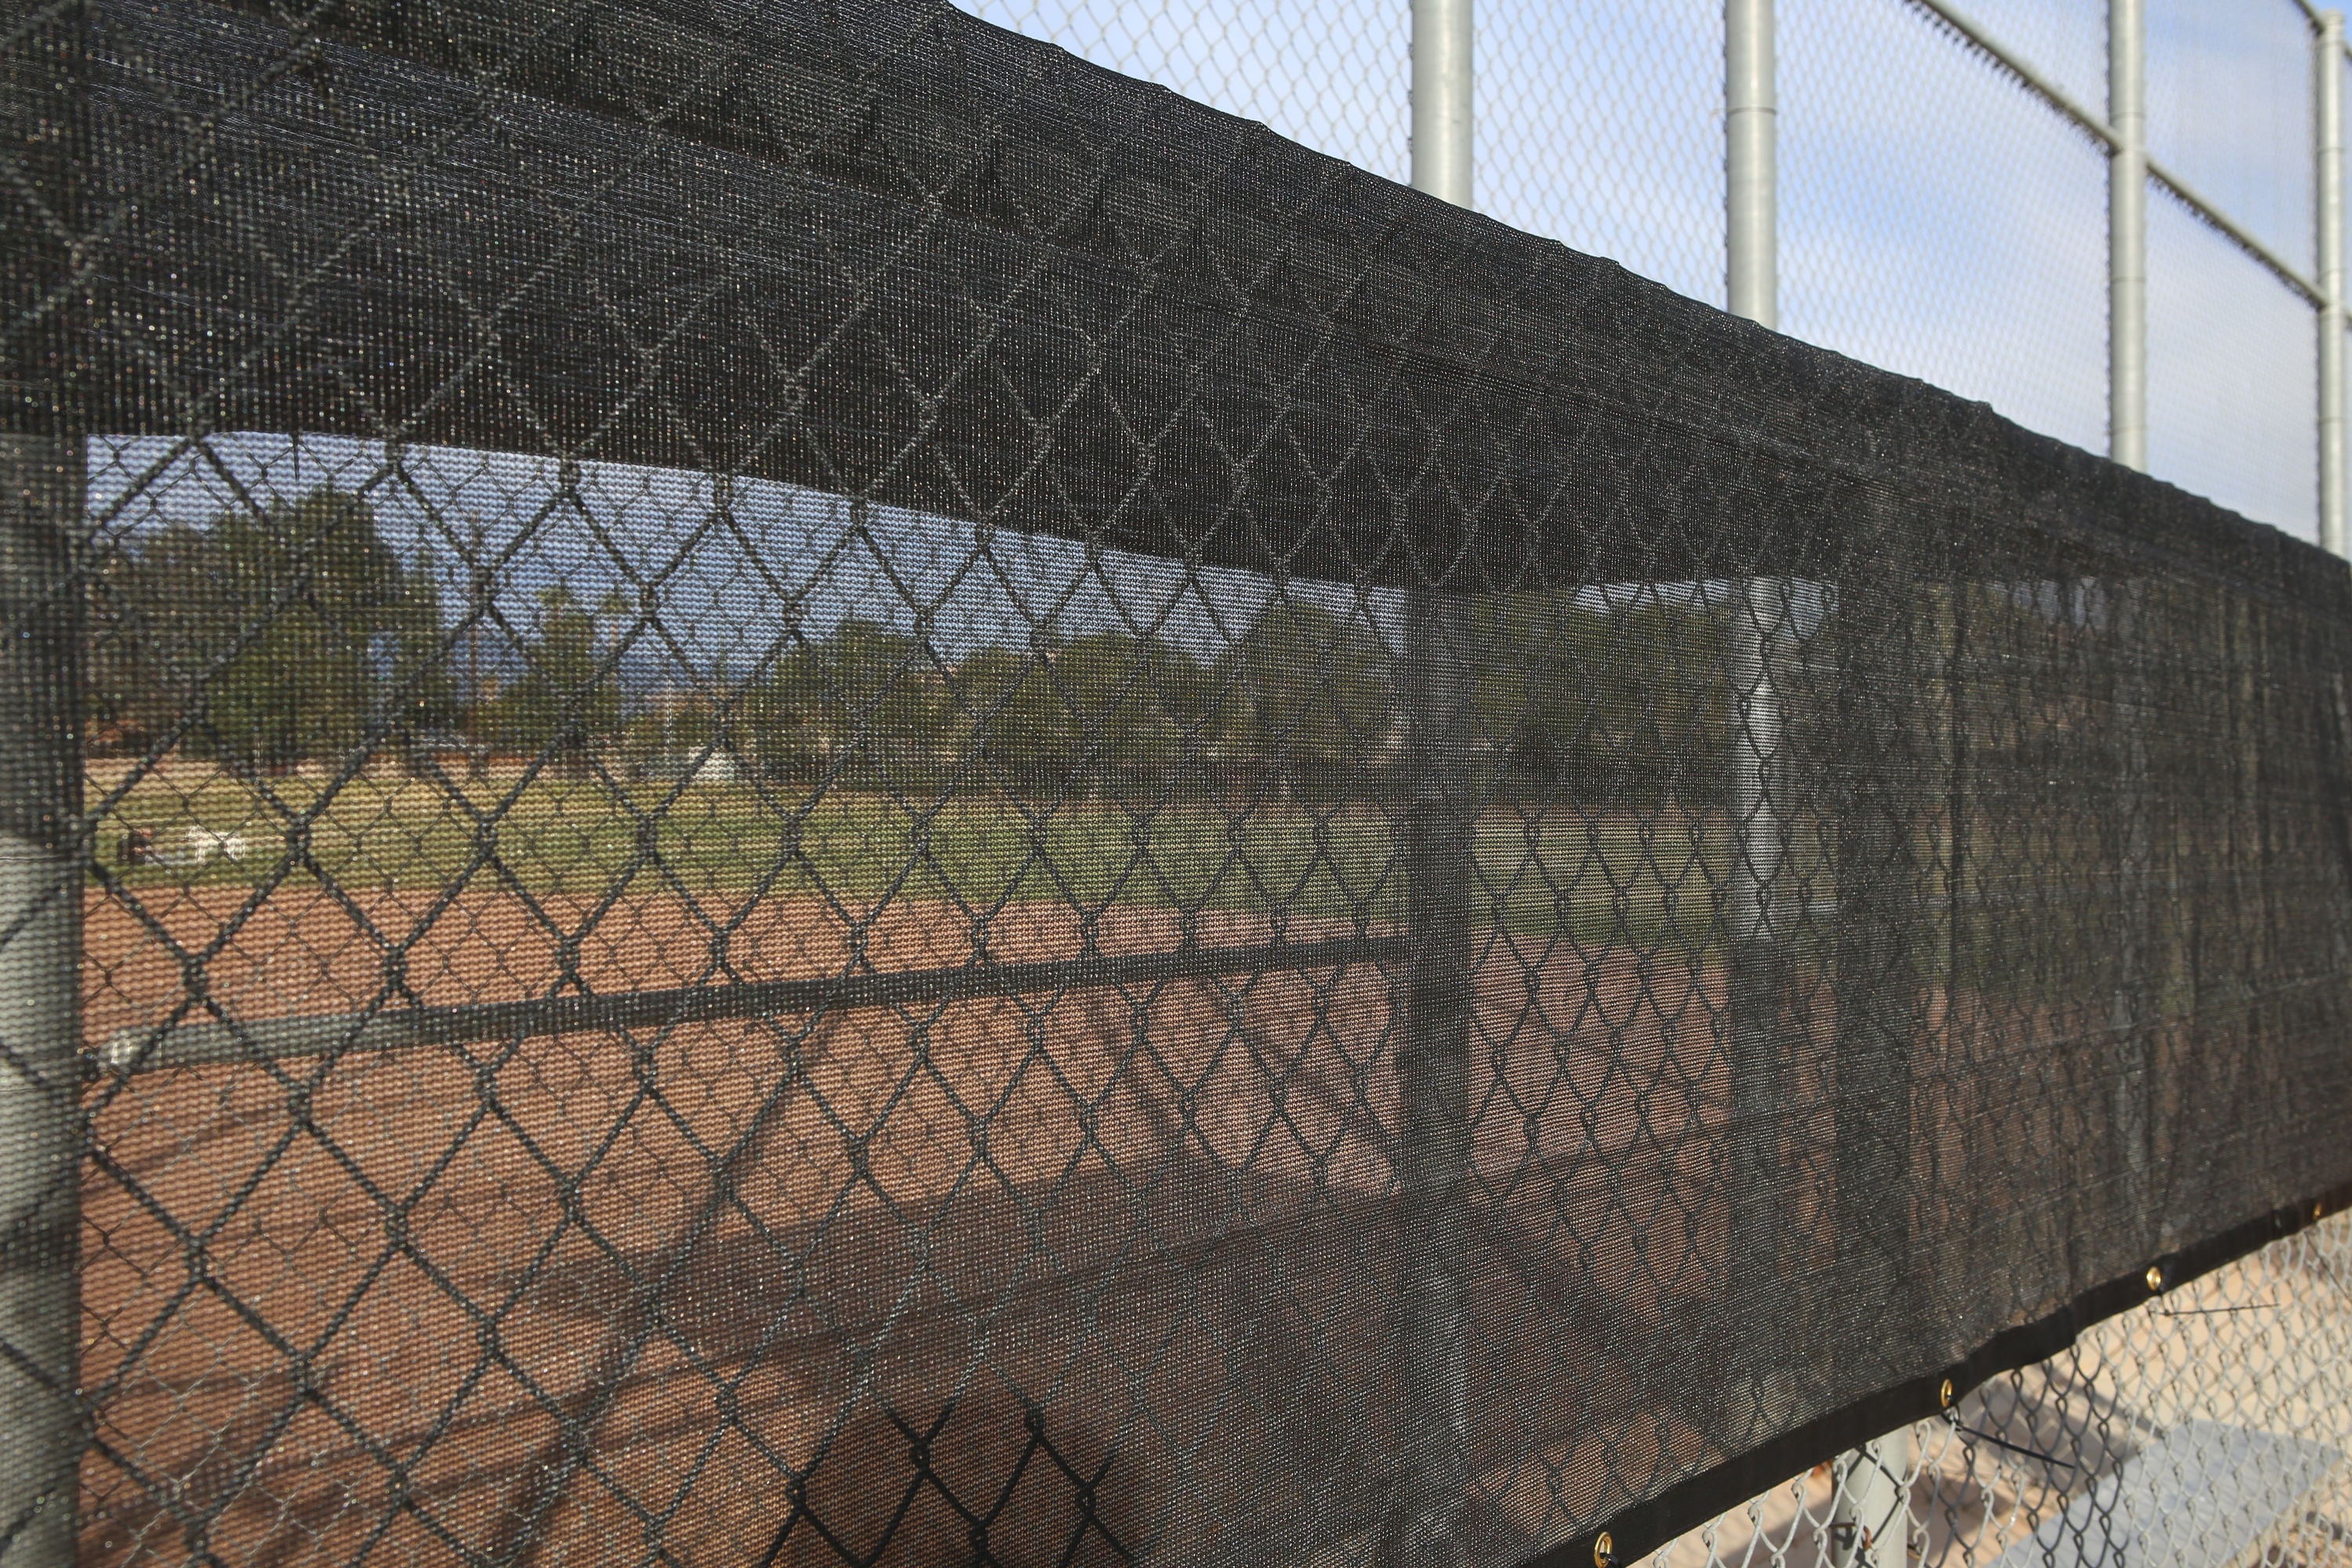 Black Lacing Cord - Secure Screens & Tarps to Fences or Structures